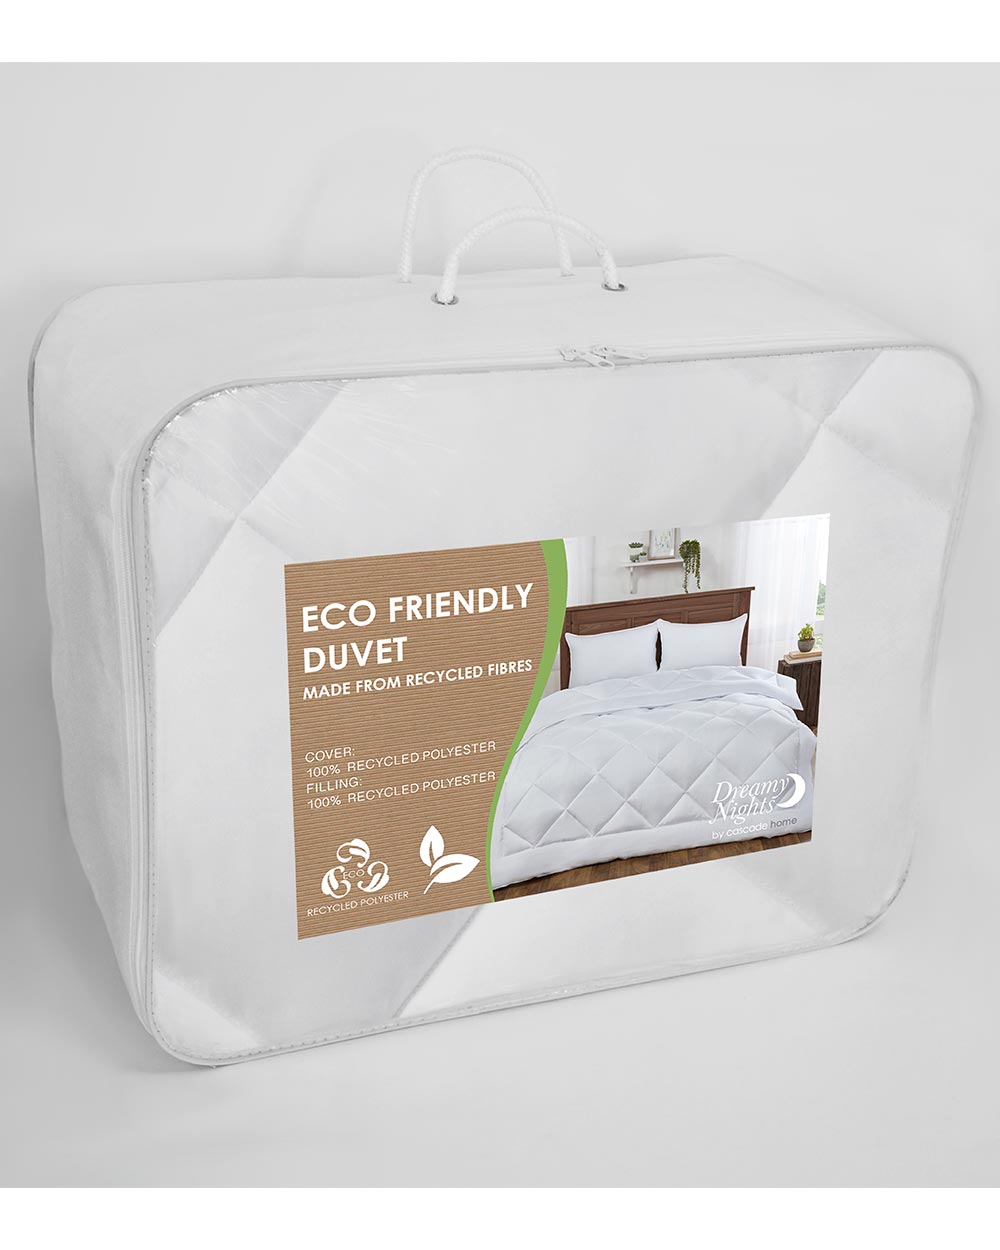 This king duvet fits any standard size king bed comfortably. Measuring 230 cm x 220 cm this duvet gives just the right amount of drape for maximum comfort.   A medium 10.5 Tog duvet is ideal in spring and autumn. Perfect if you are sensitive to changing temperatures, or if you get too hot and stuffy in the thickest tog.